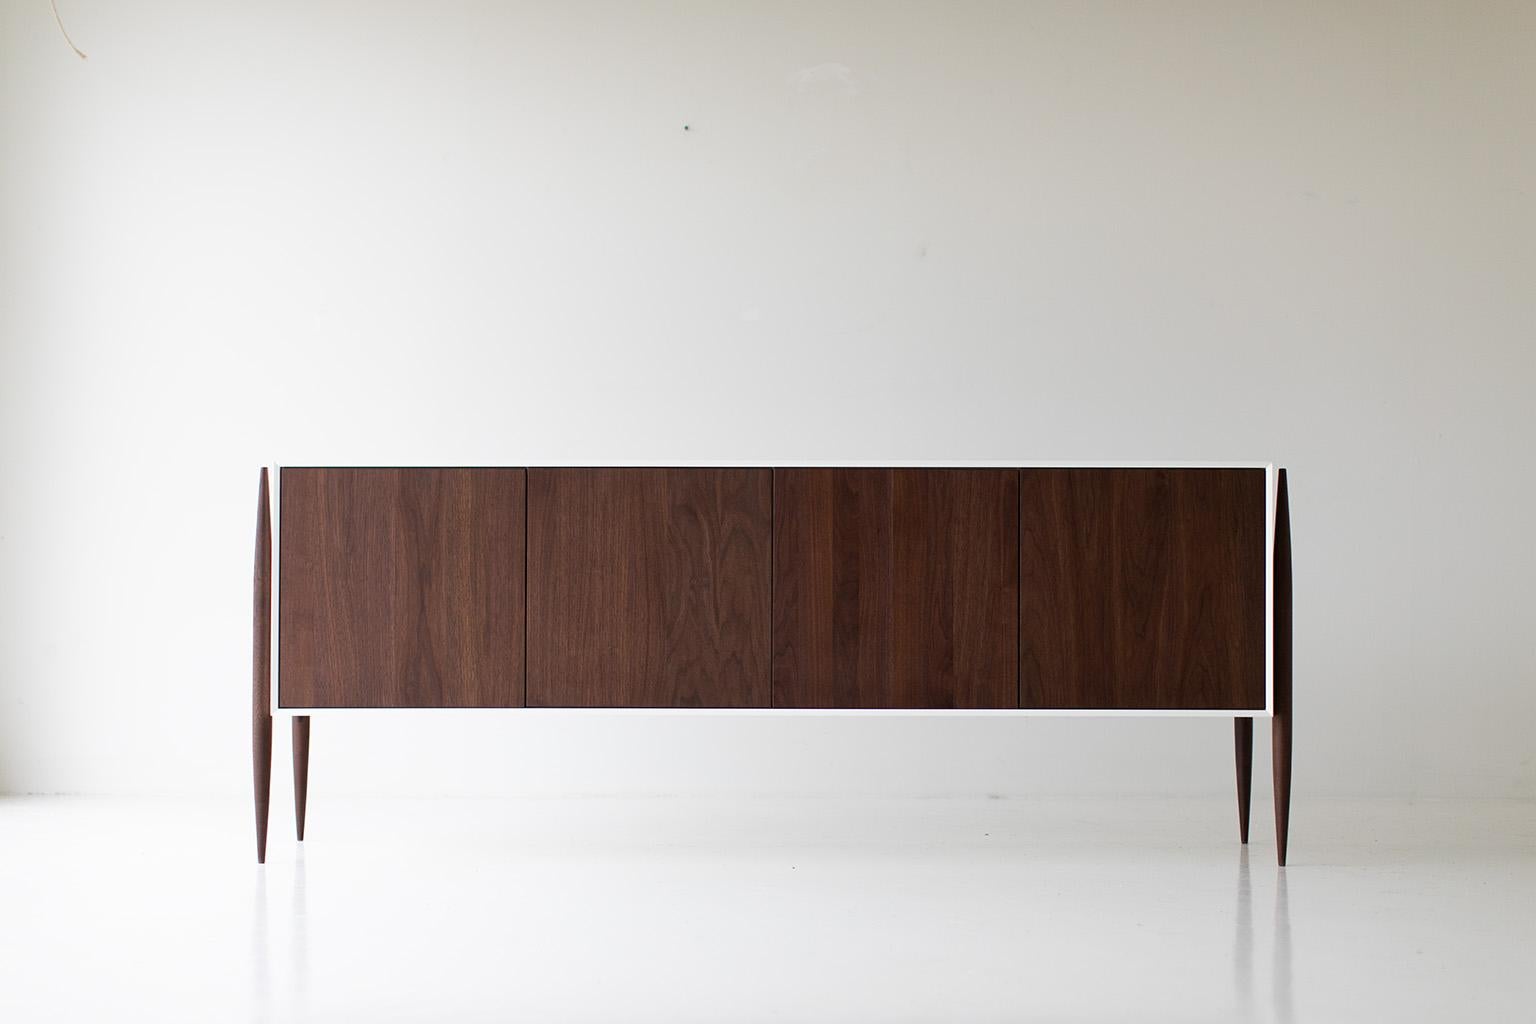 Craftassociates Credenza, Cambre Modern Credenza, Walnut and Maple, White

This modern walnut credenza from the Cambre Collection for Craft Associates Furniture is expertly crafted. The legs and door fronts are constructed by artisans from solid